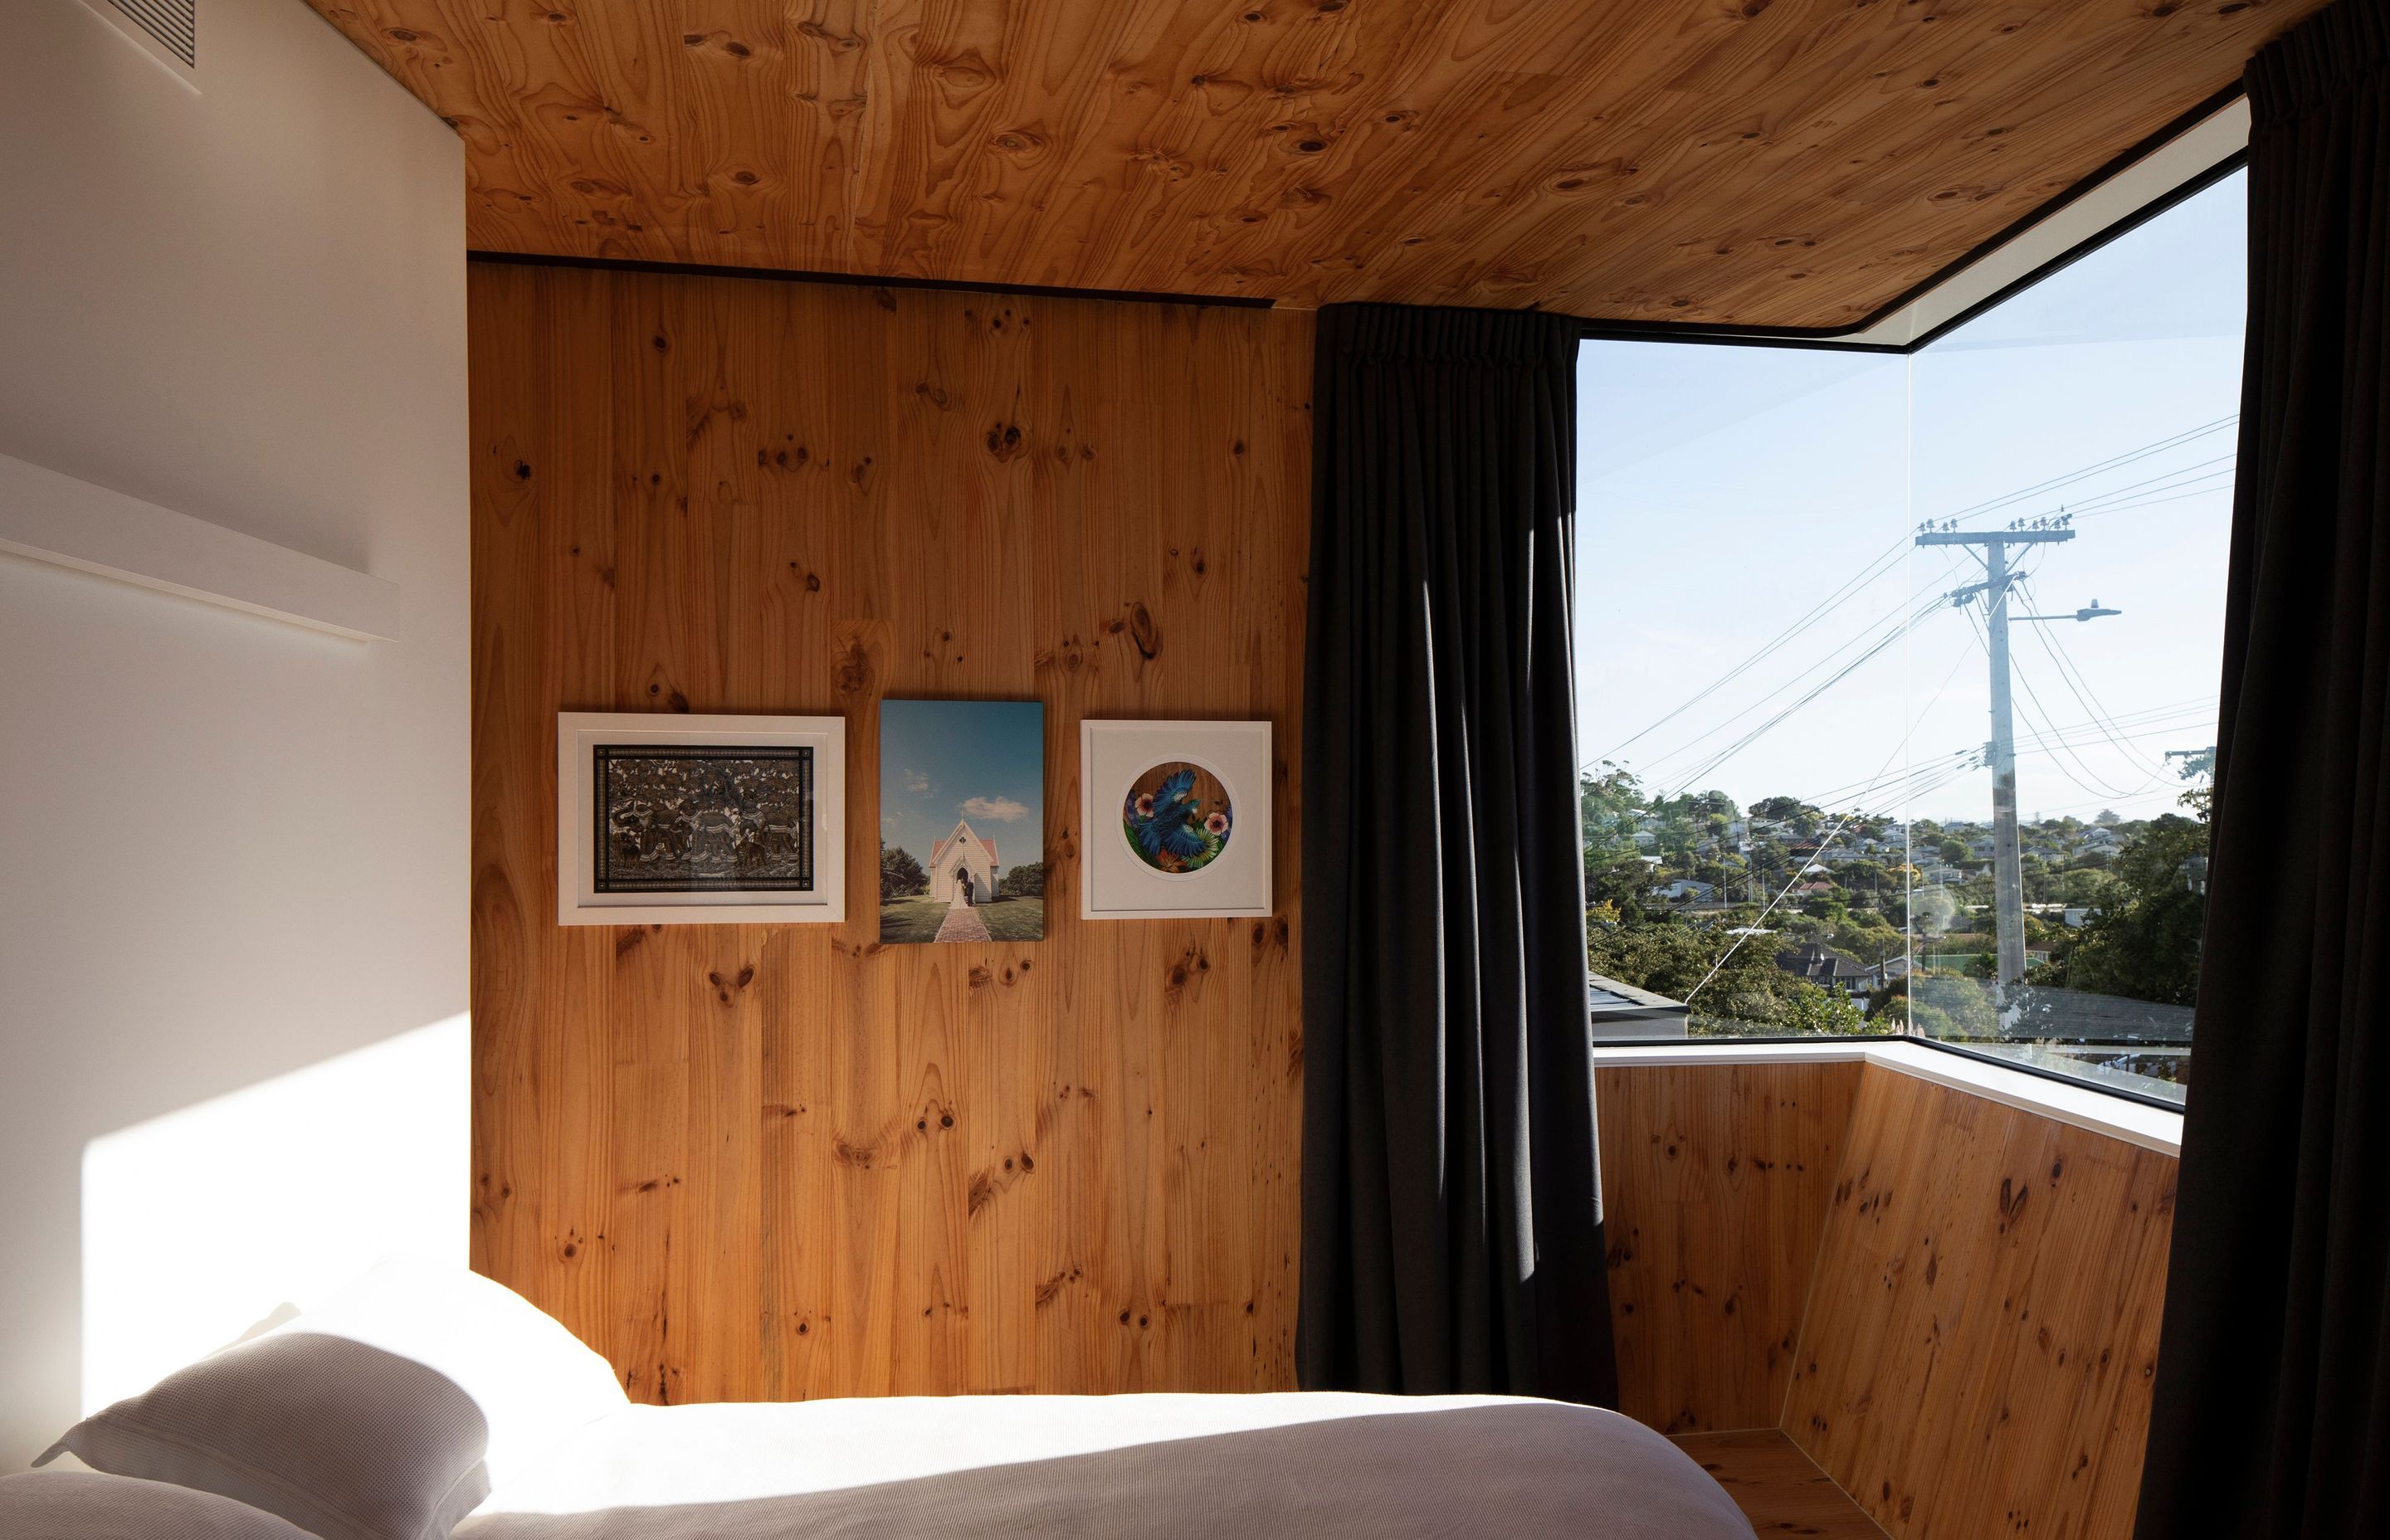 The timber-clad master bedroom has a corner window facing the Waitakere Ranges and unusual angled walls.